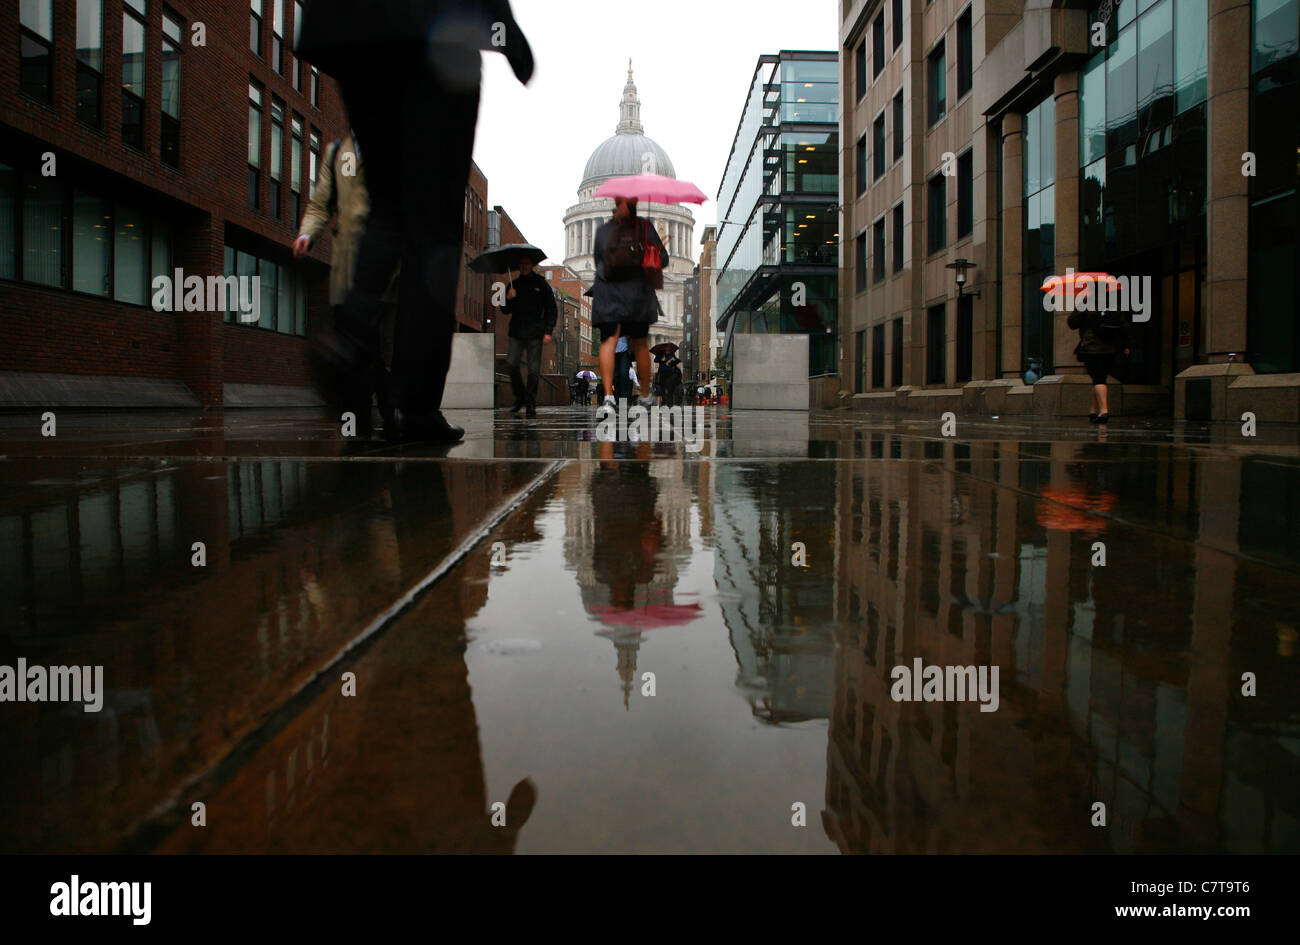 Pedestrians walking along a rainy Peter's Hill towards St Paul's Cathedral, City of London, UK Stock Photo